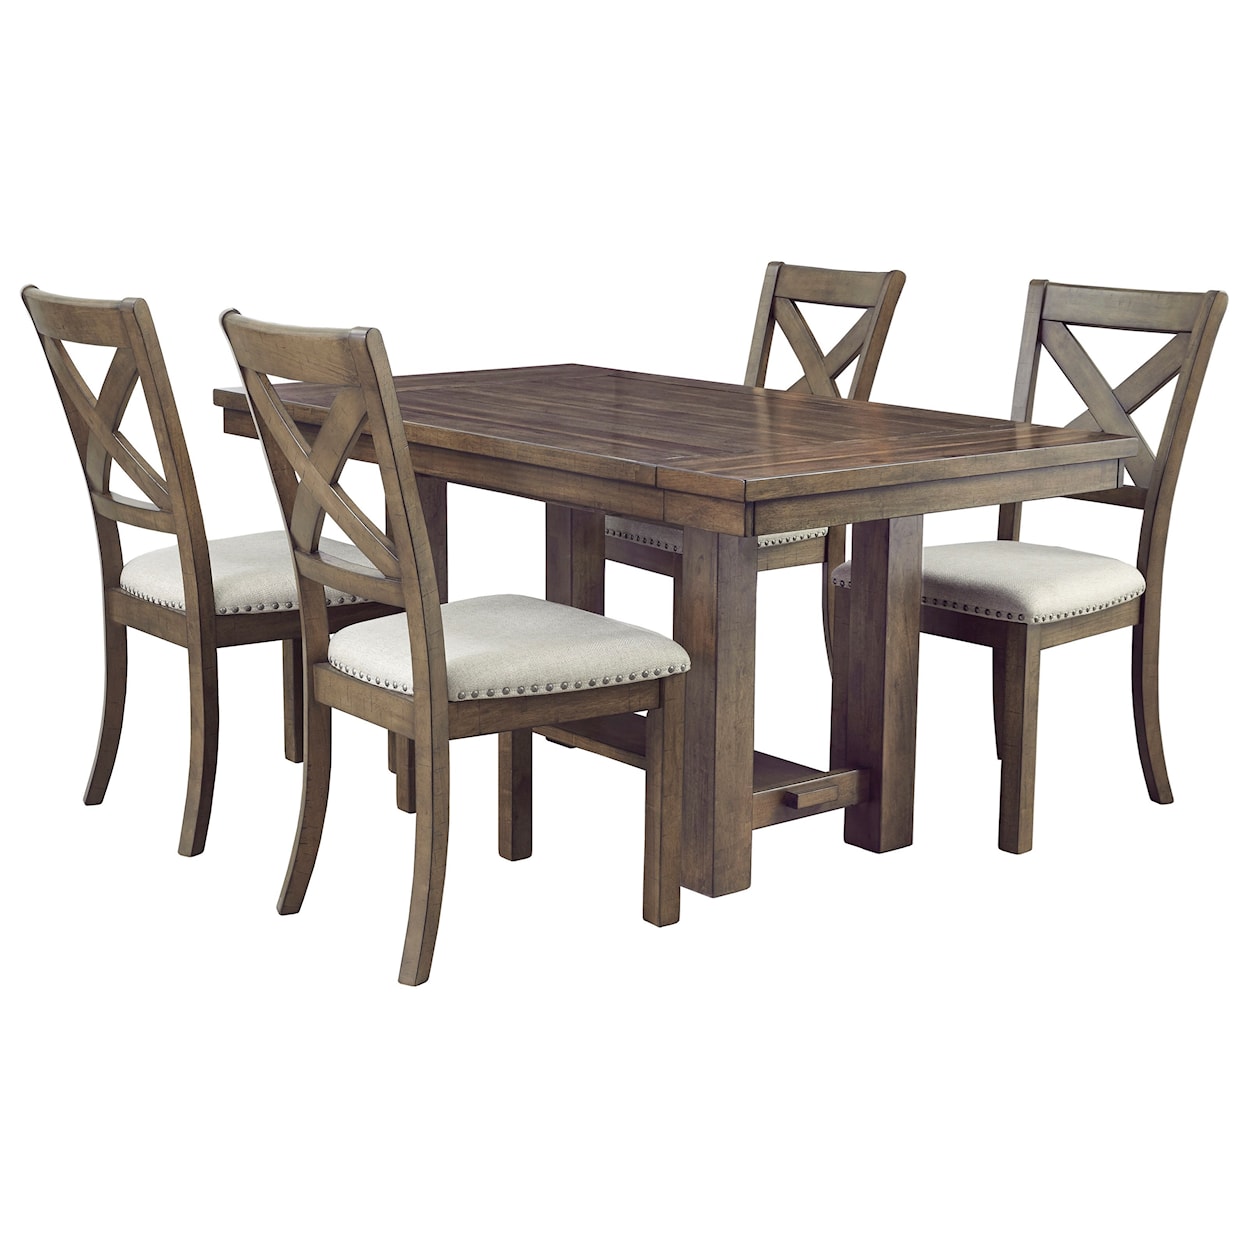 Ashley Furniture Signature Design Moriville 5-Piece Table and Chair Set